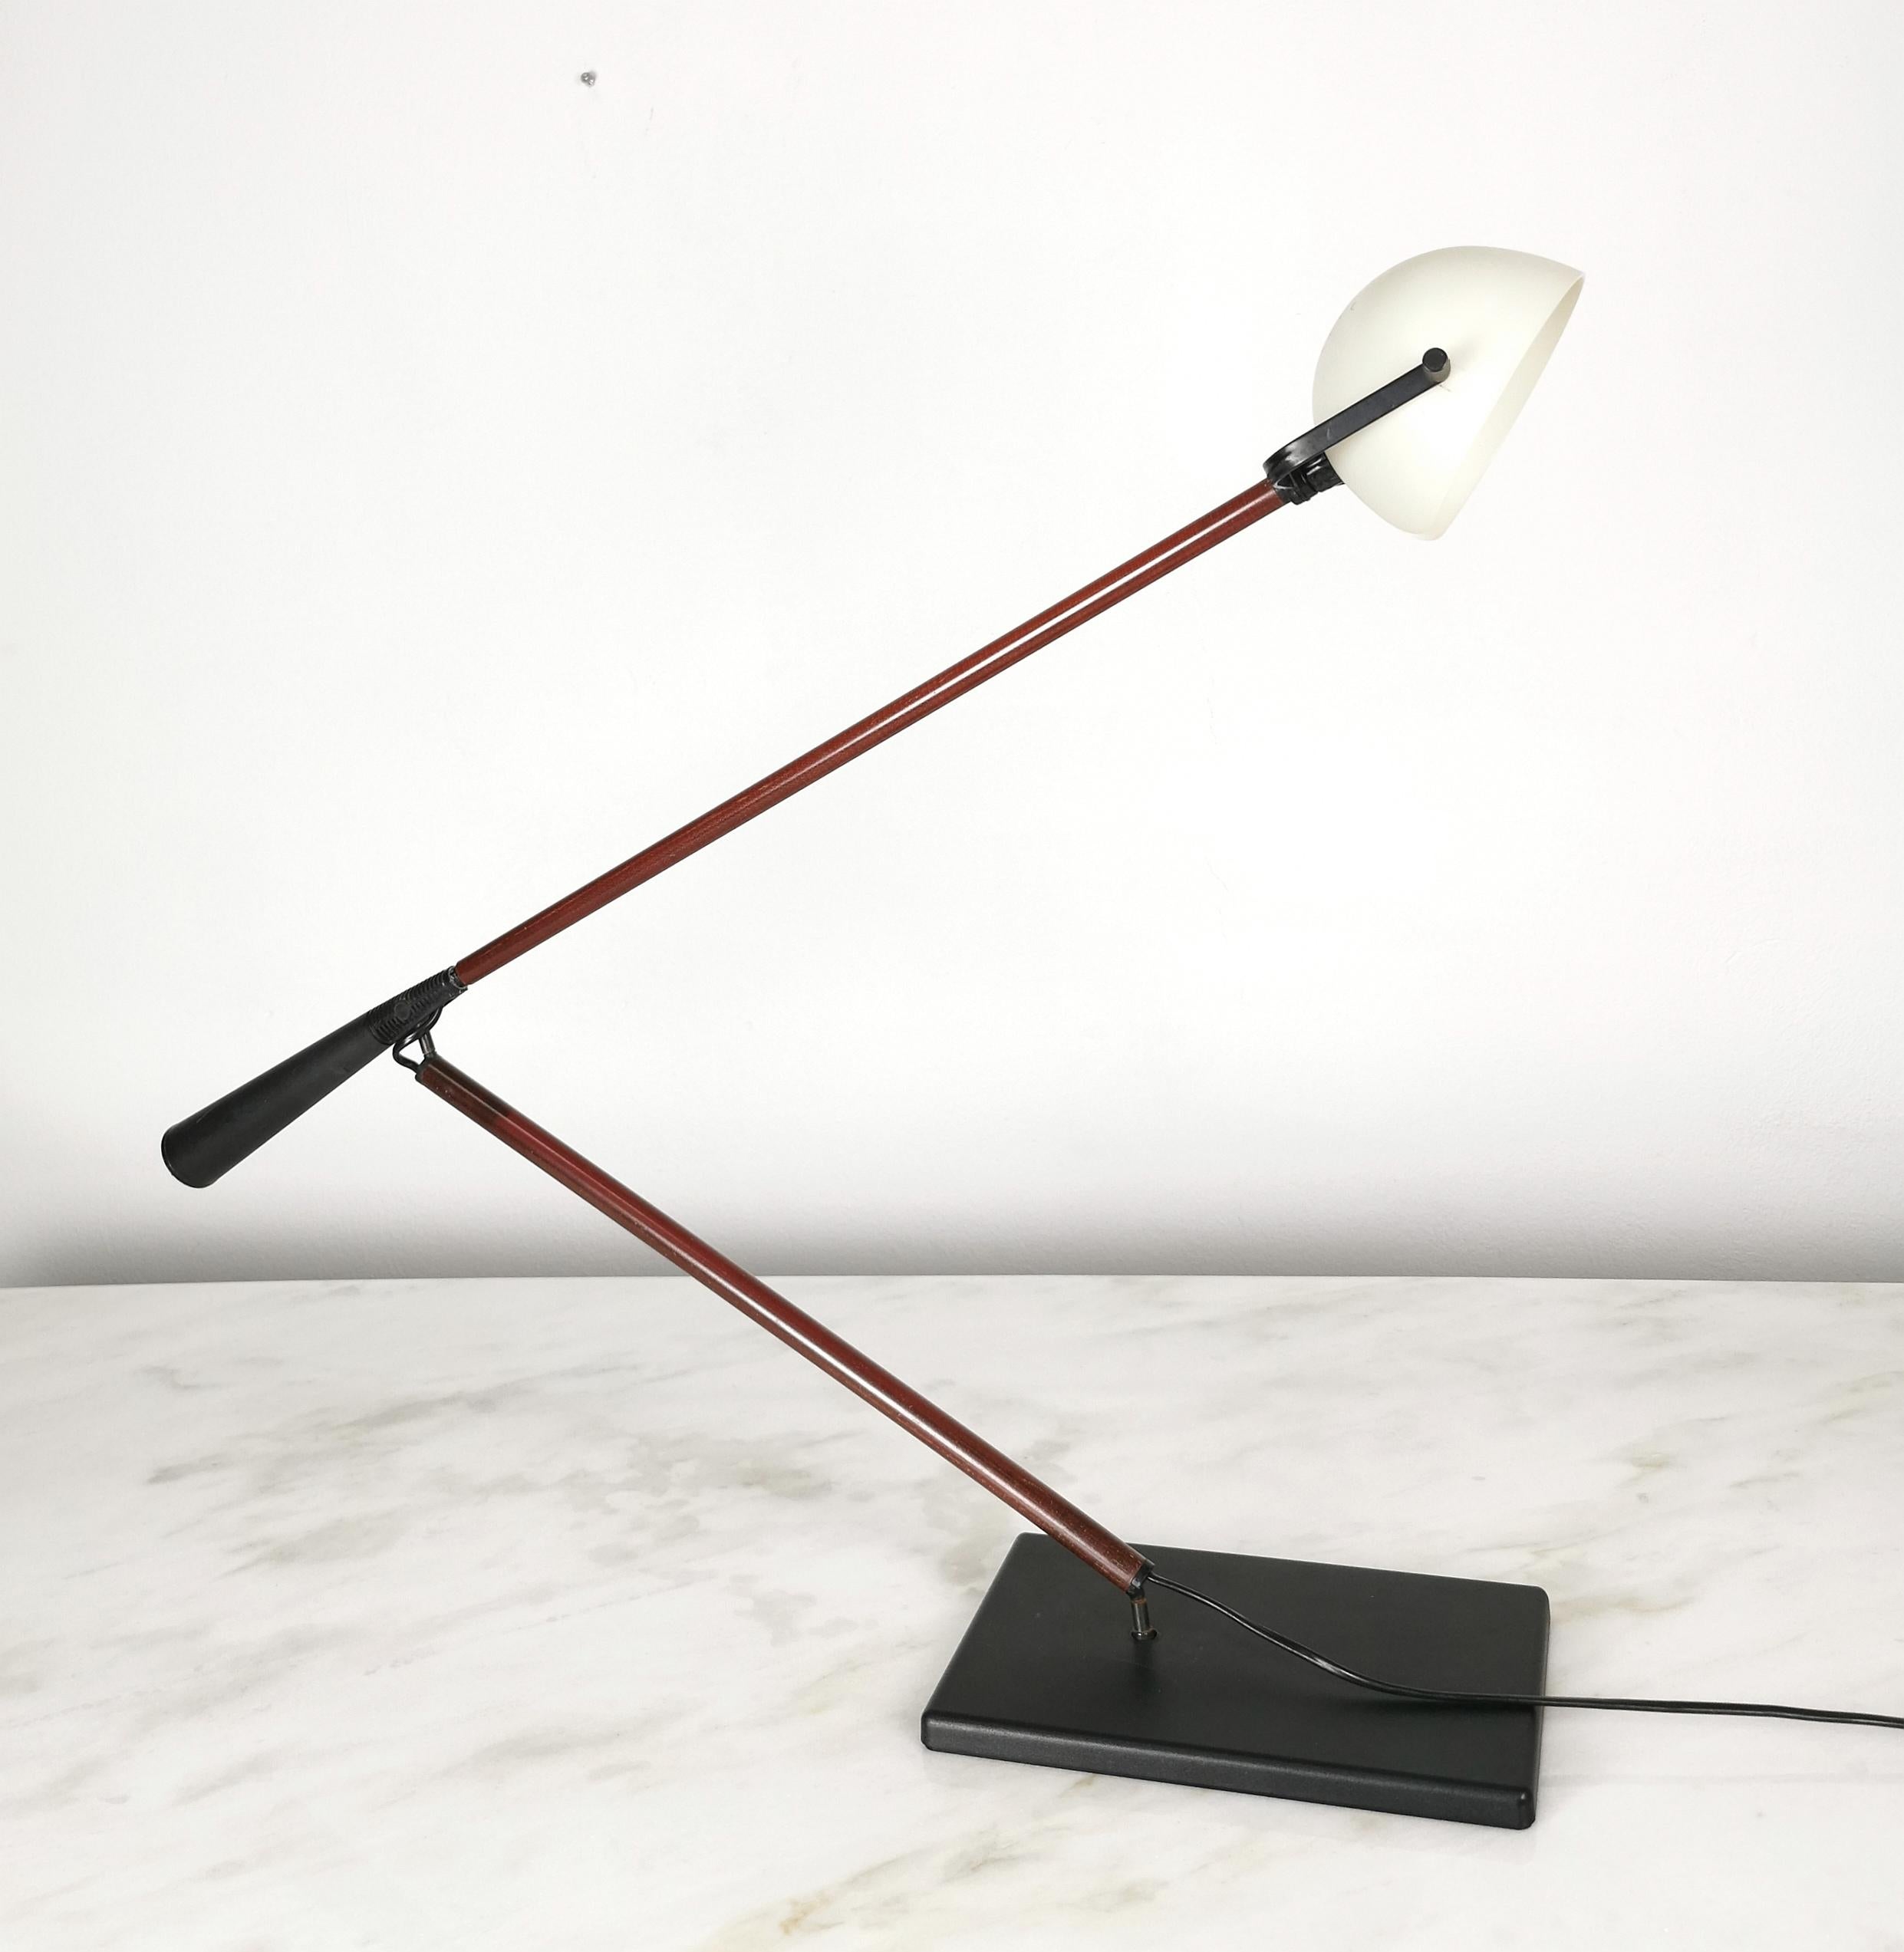 Rare model 613 table or desk lamp designed by Italian designers Paolo Rizzatto and Gino Sarfatti and produced in the 1970s by Arteluce.
The lamp was made of fiberglass with a black rectangular base, support and arm in red with a counterweight at